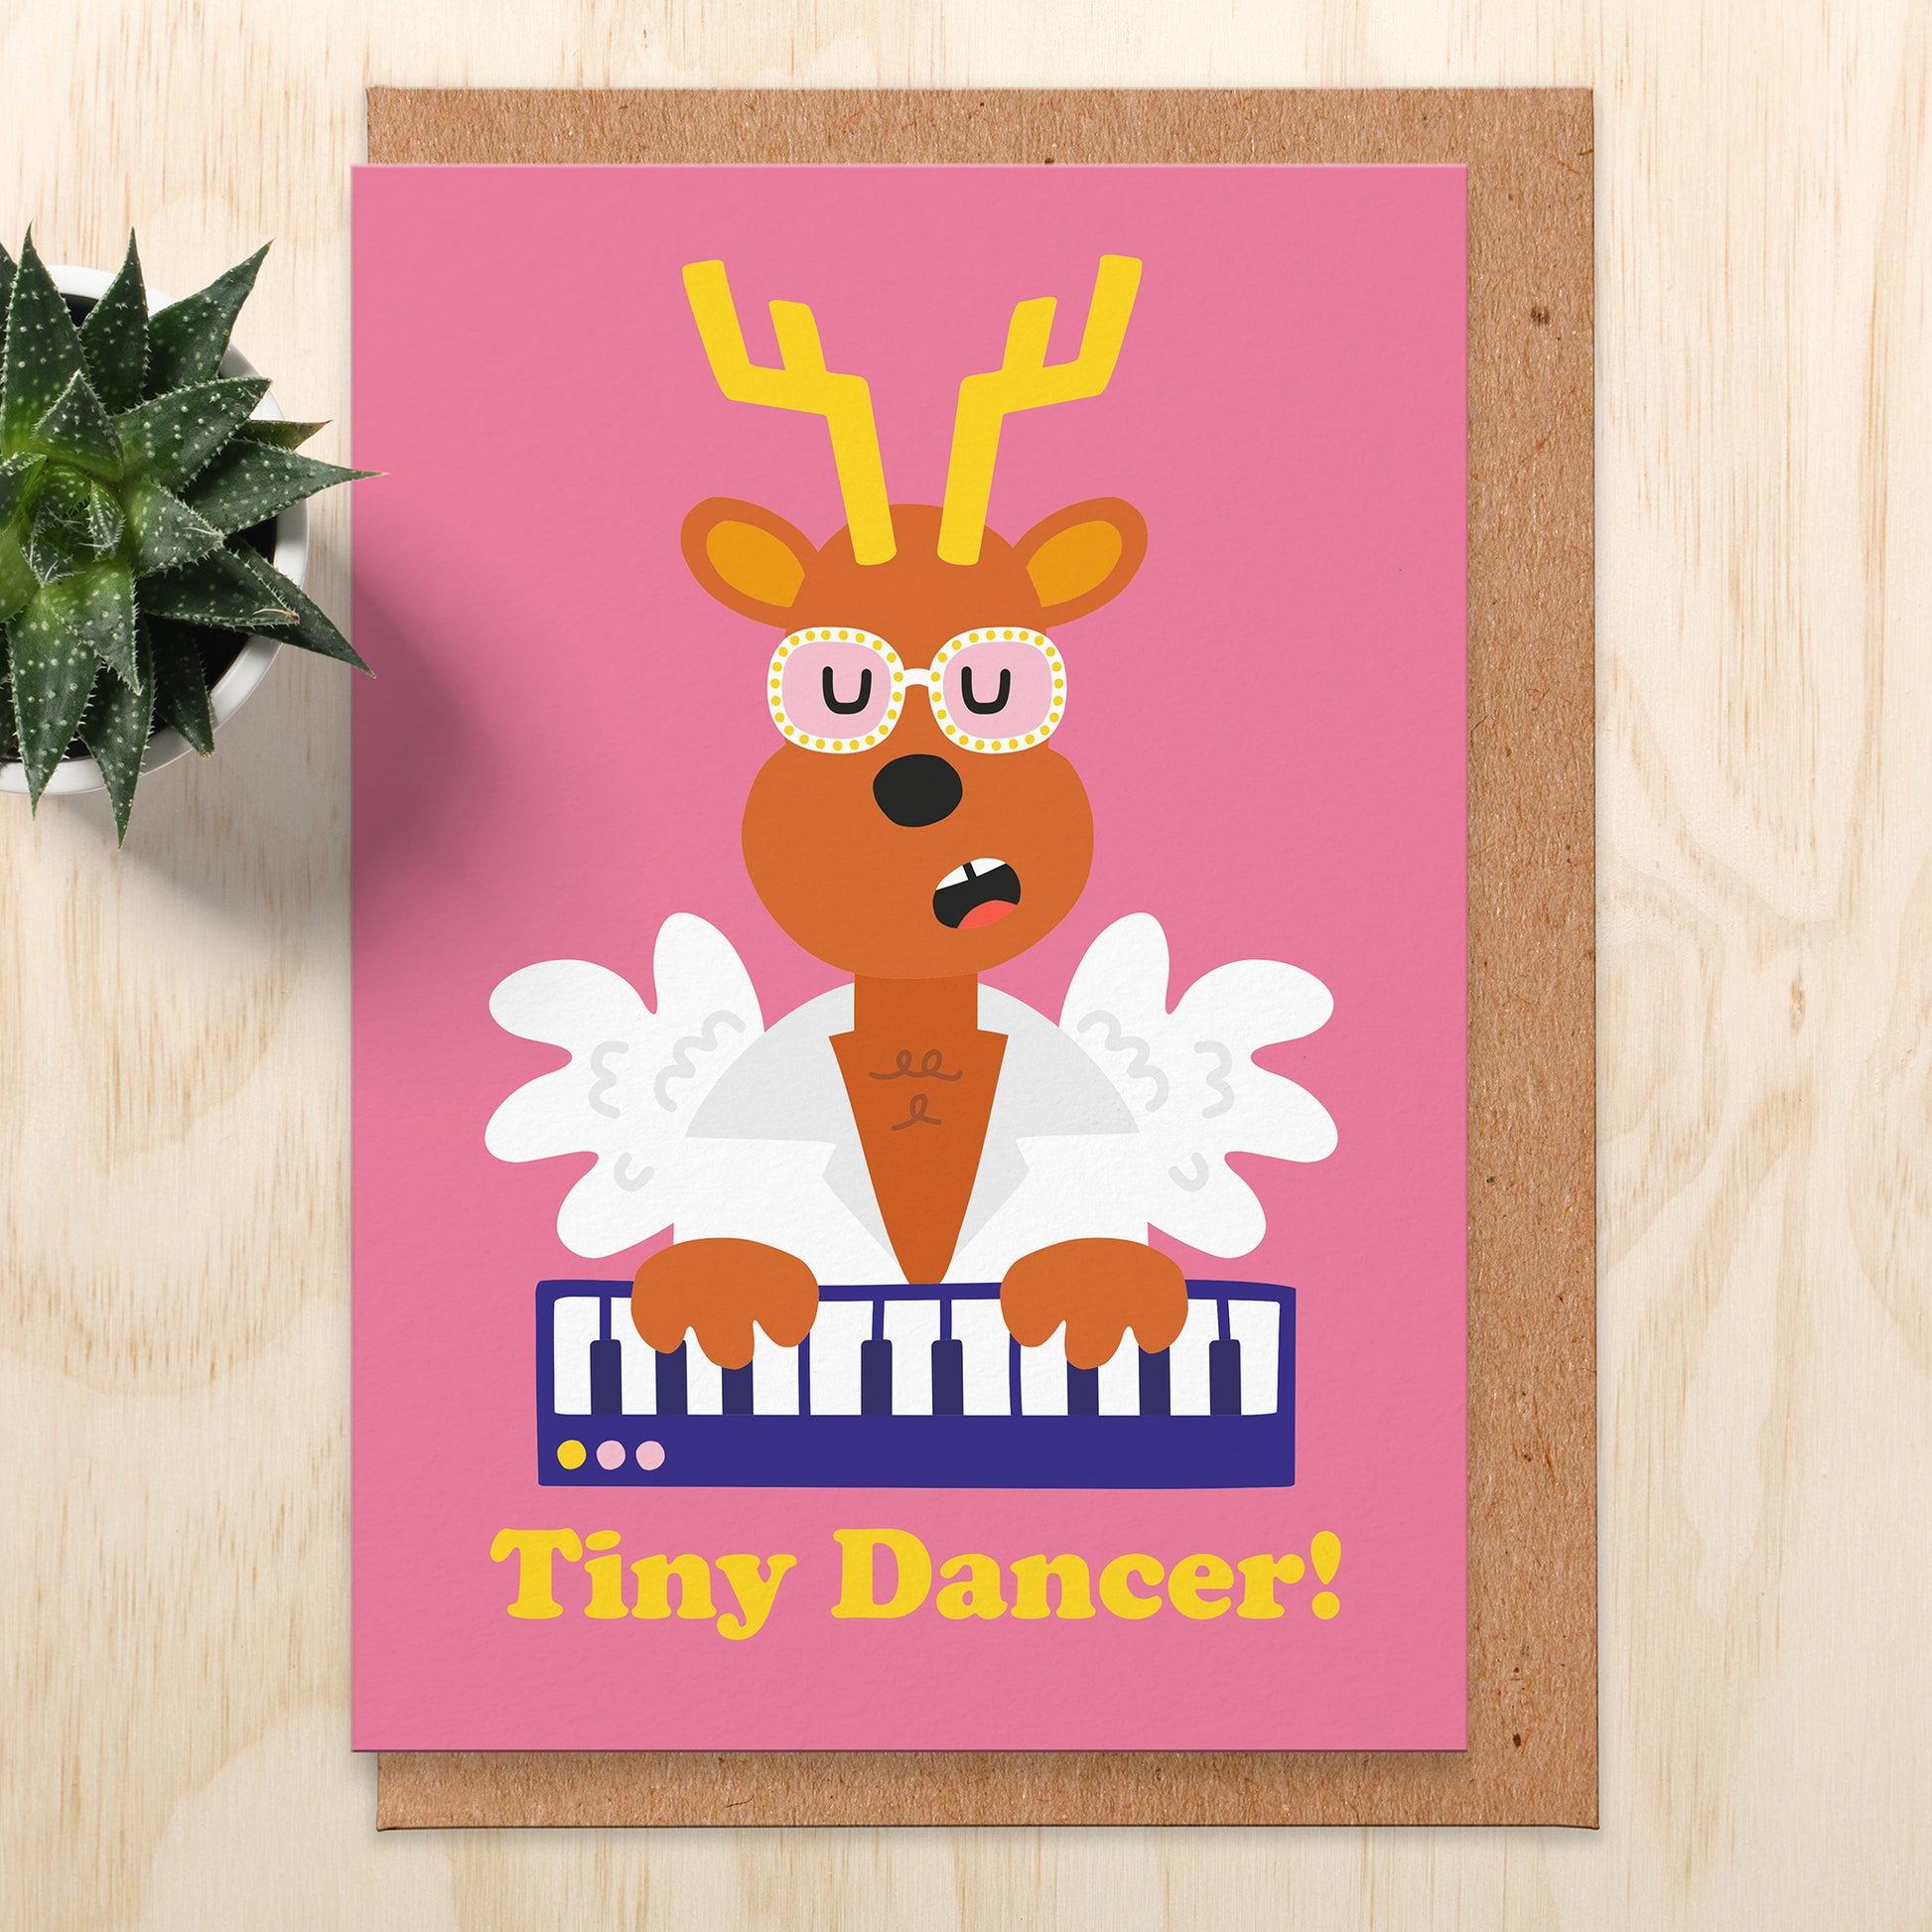 Christmas card with an illustration of reindeer dressed as tiny dancer singer and playing the piano. The test reads tiny dancer!